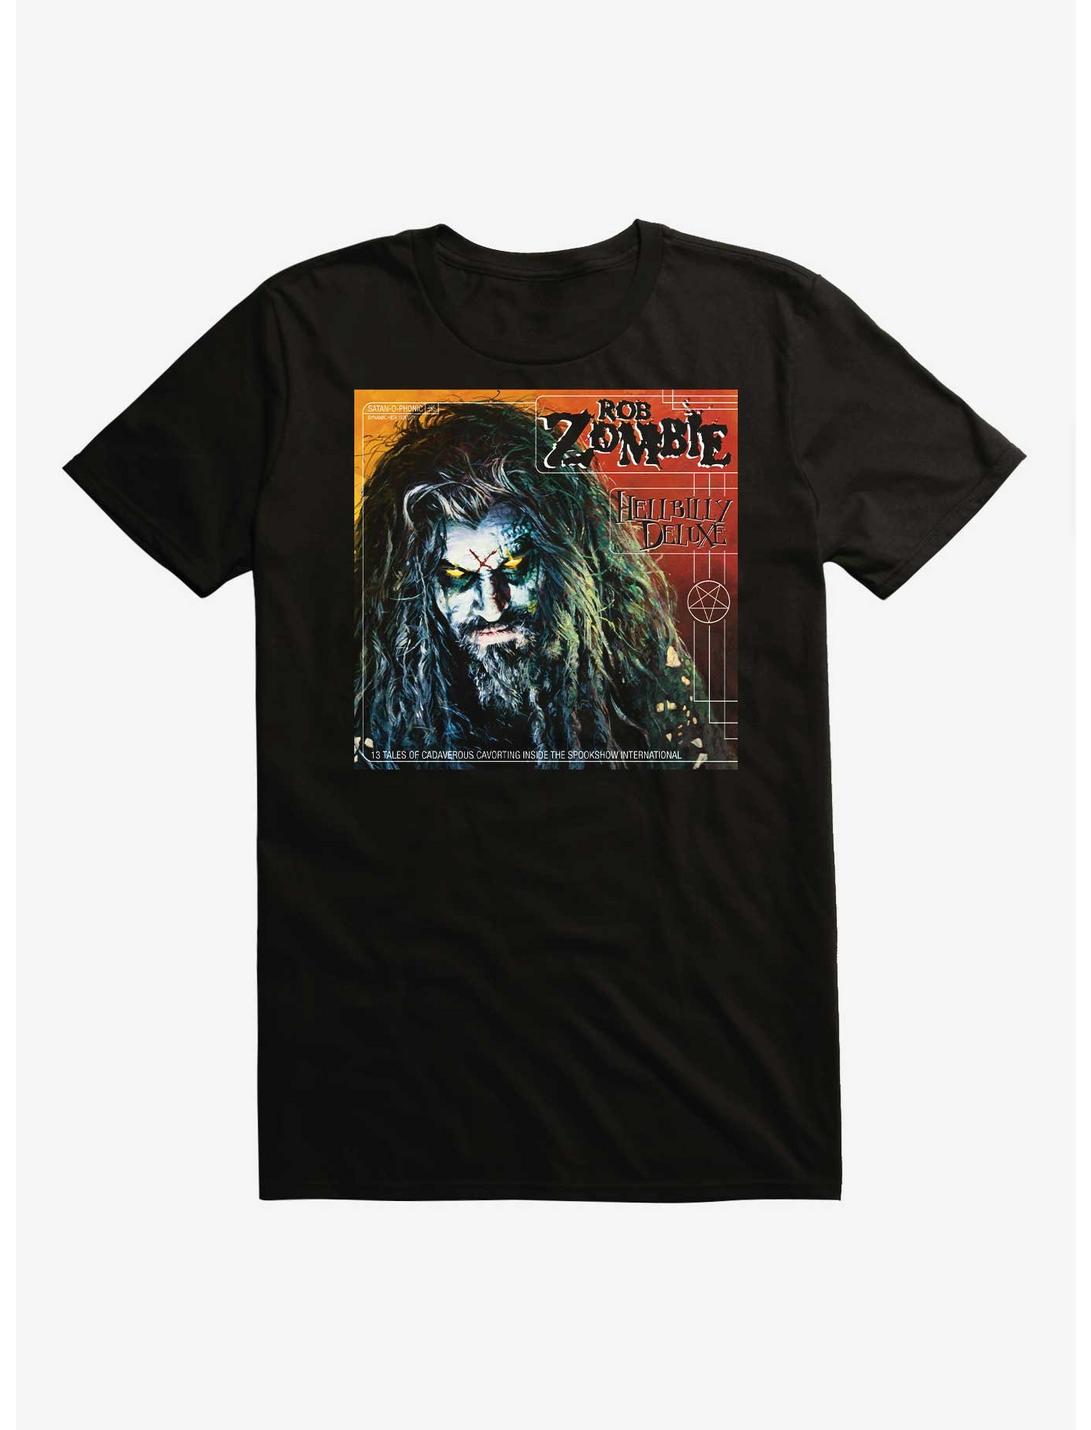 Rob Zombie Hellbilly Deluxe T-Shirt, BLACK, hi-res